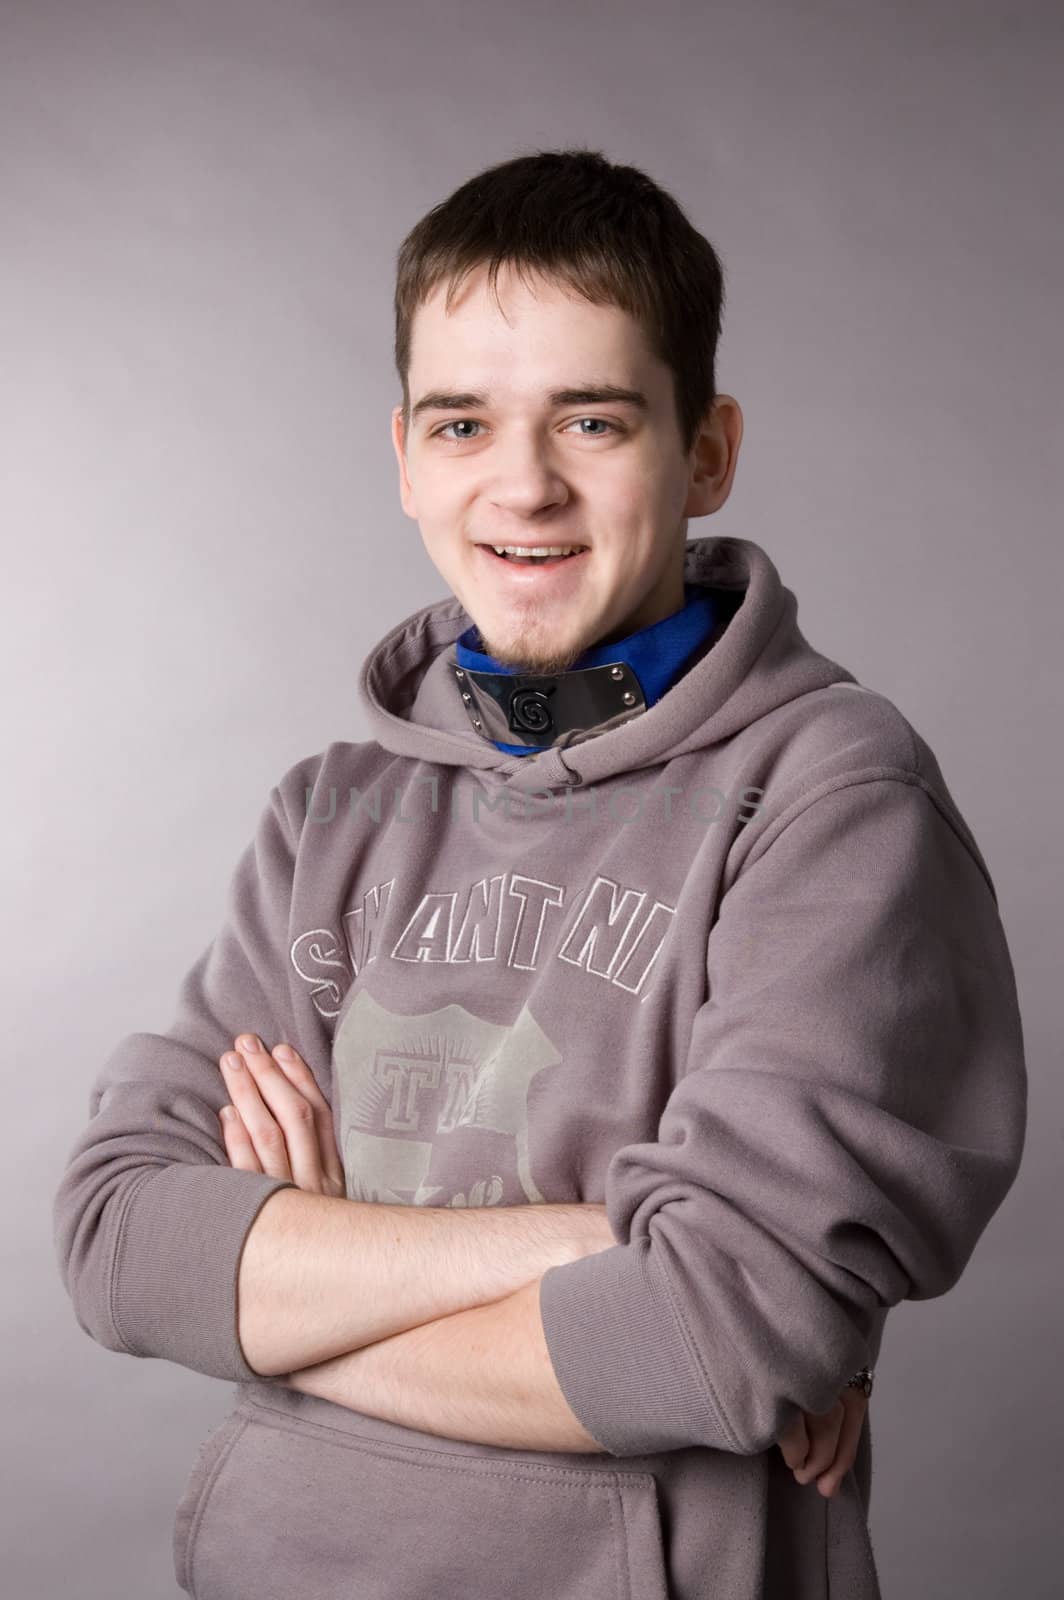 The young guy in studio on a grey background